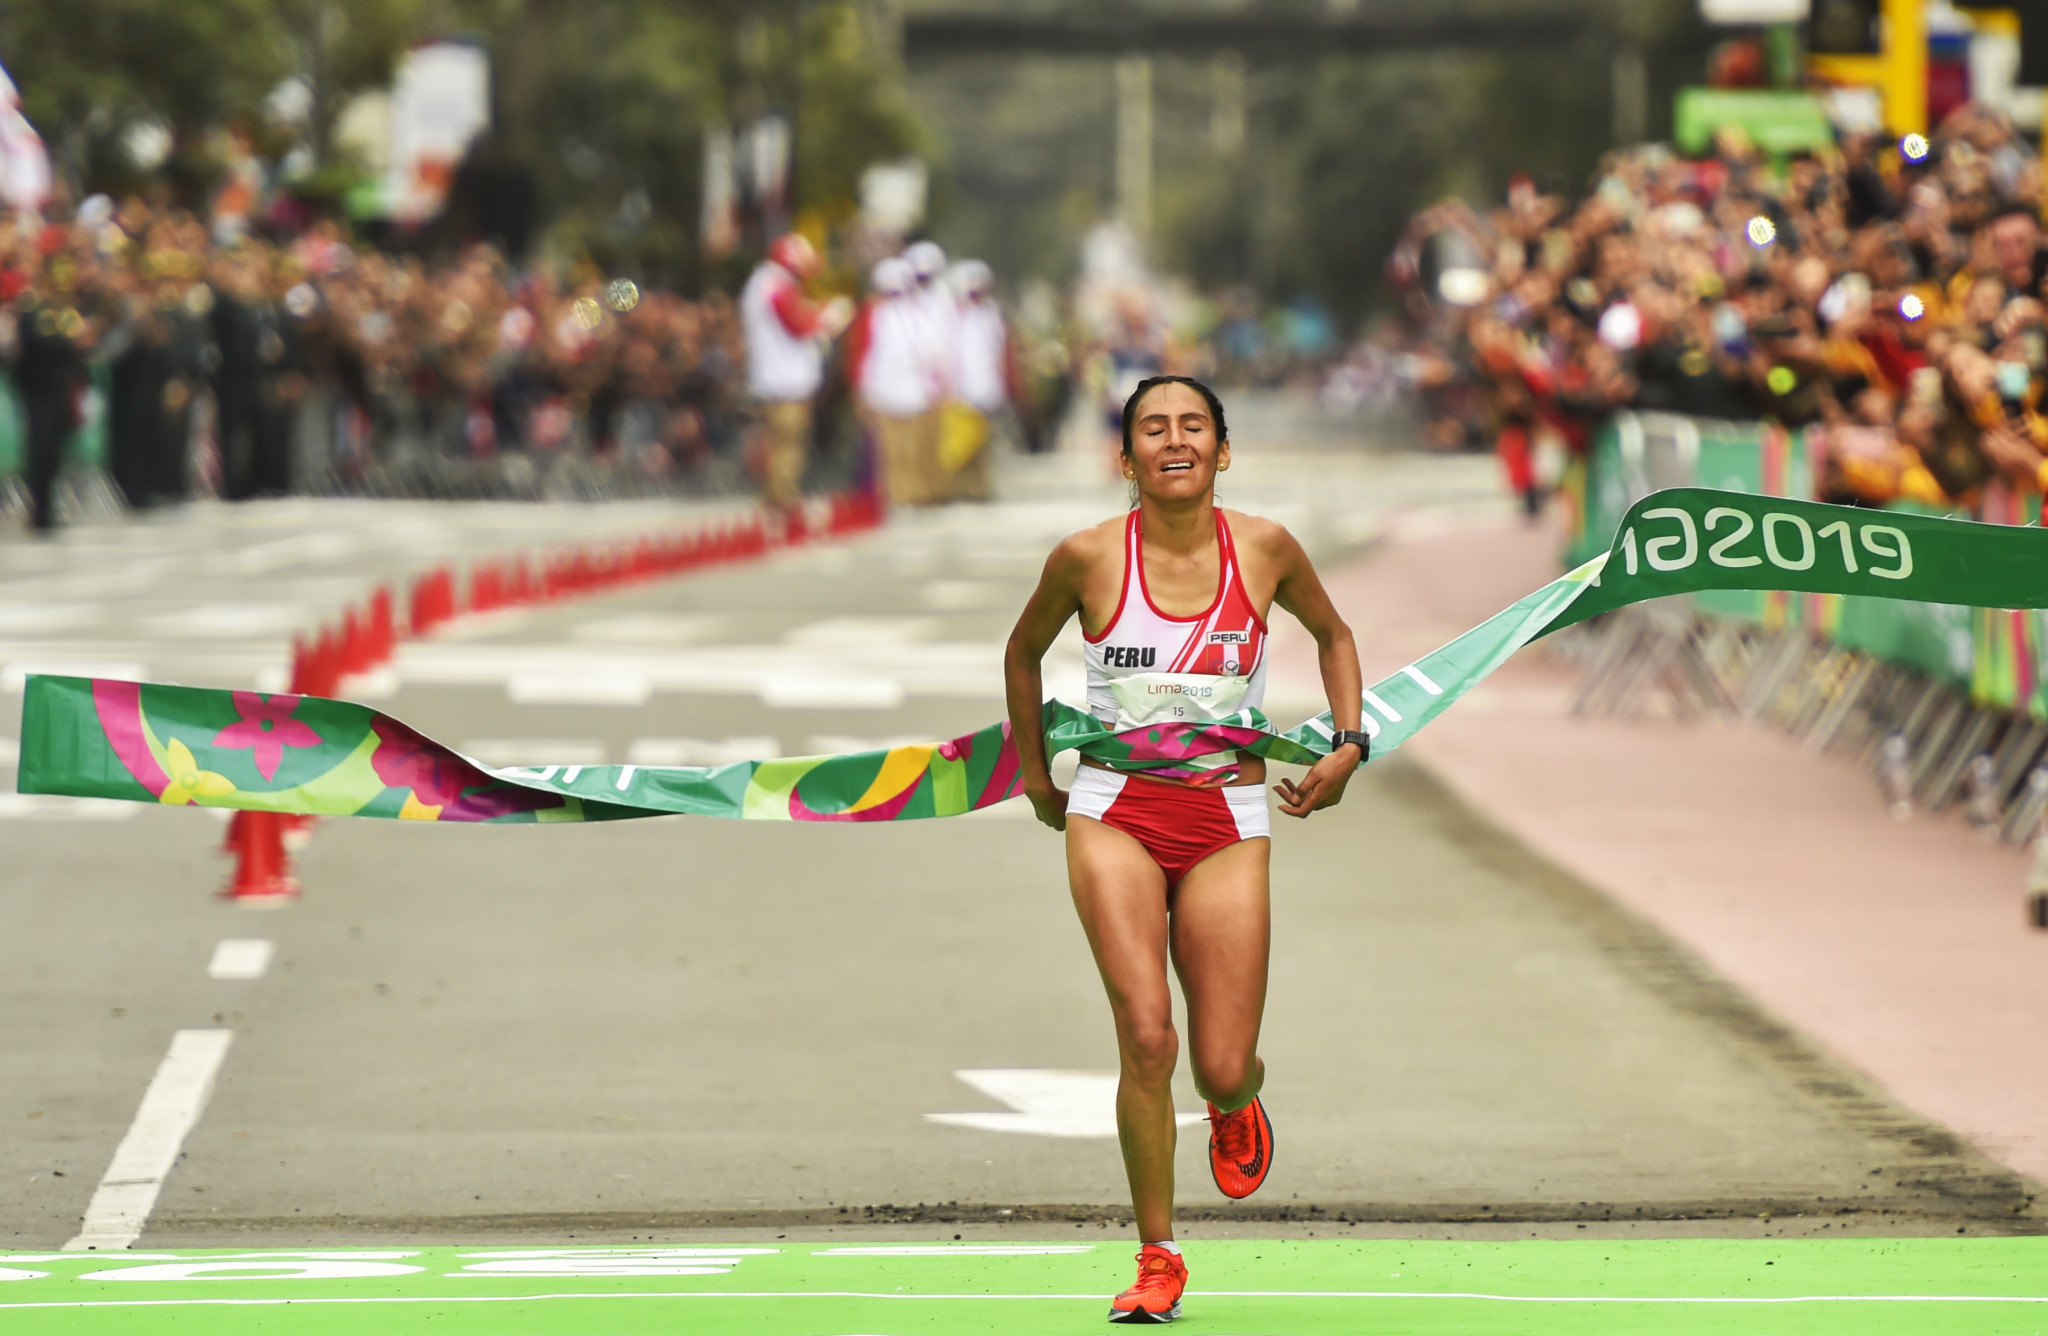 Spectators were rewarded as Gladys Tejeda won the women's race, having had her gold medal from Toronto 2015 stripped from her for an anti-doping violation ©Lima 2019